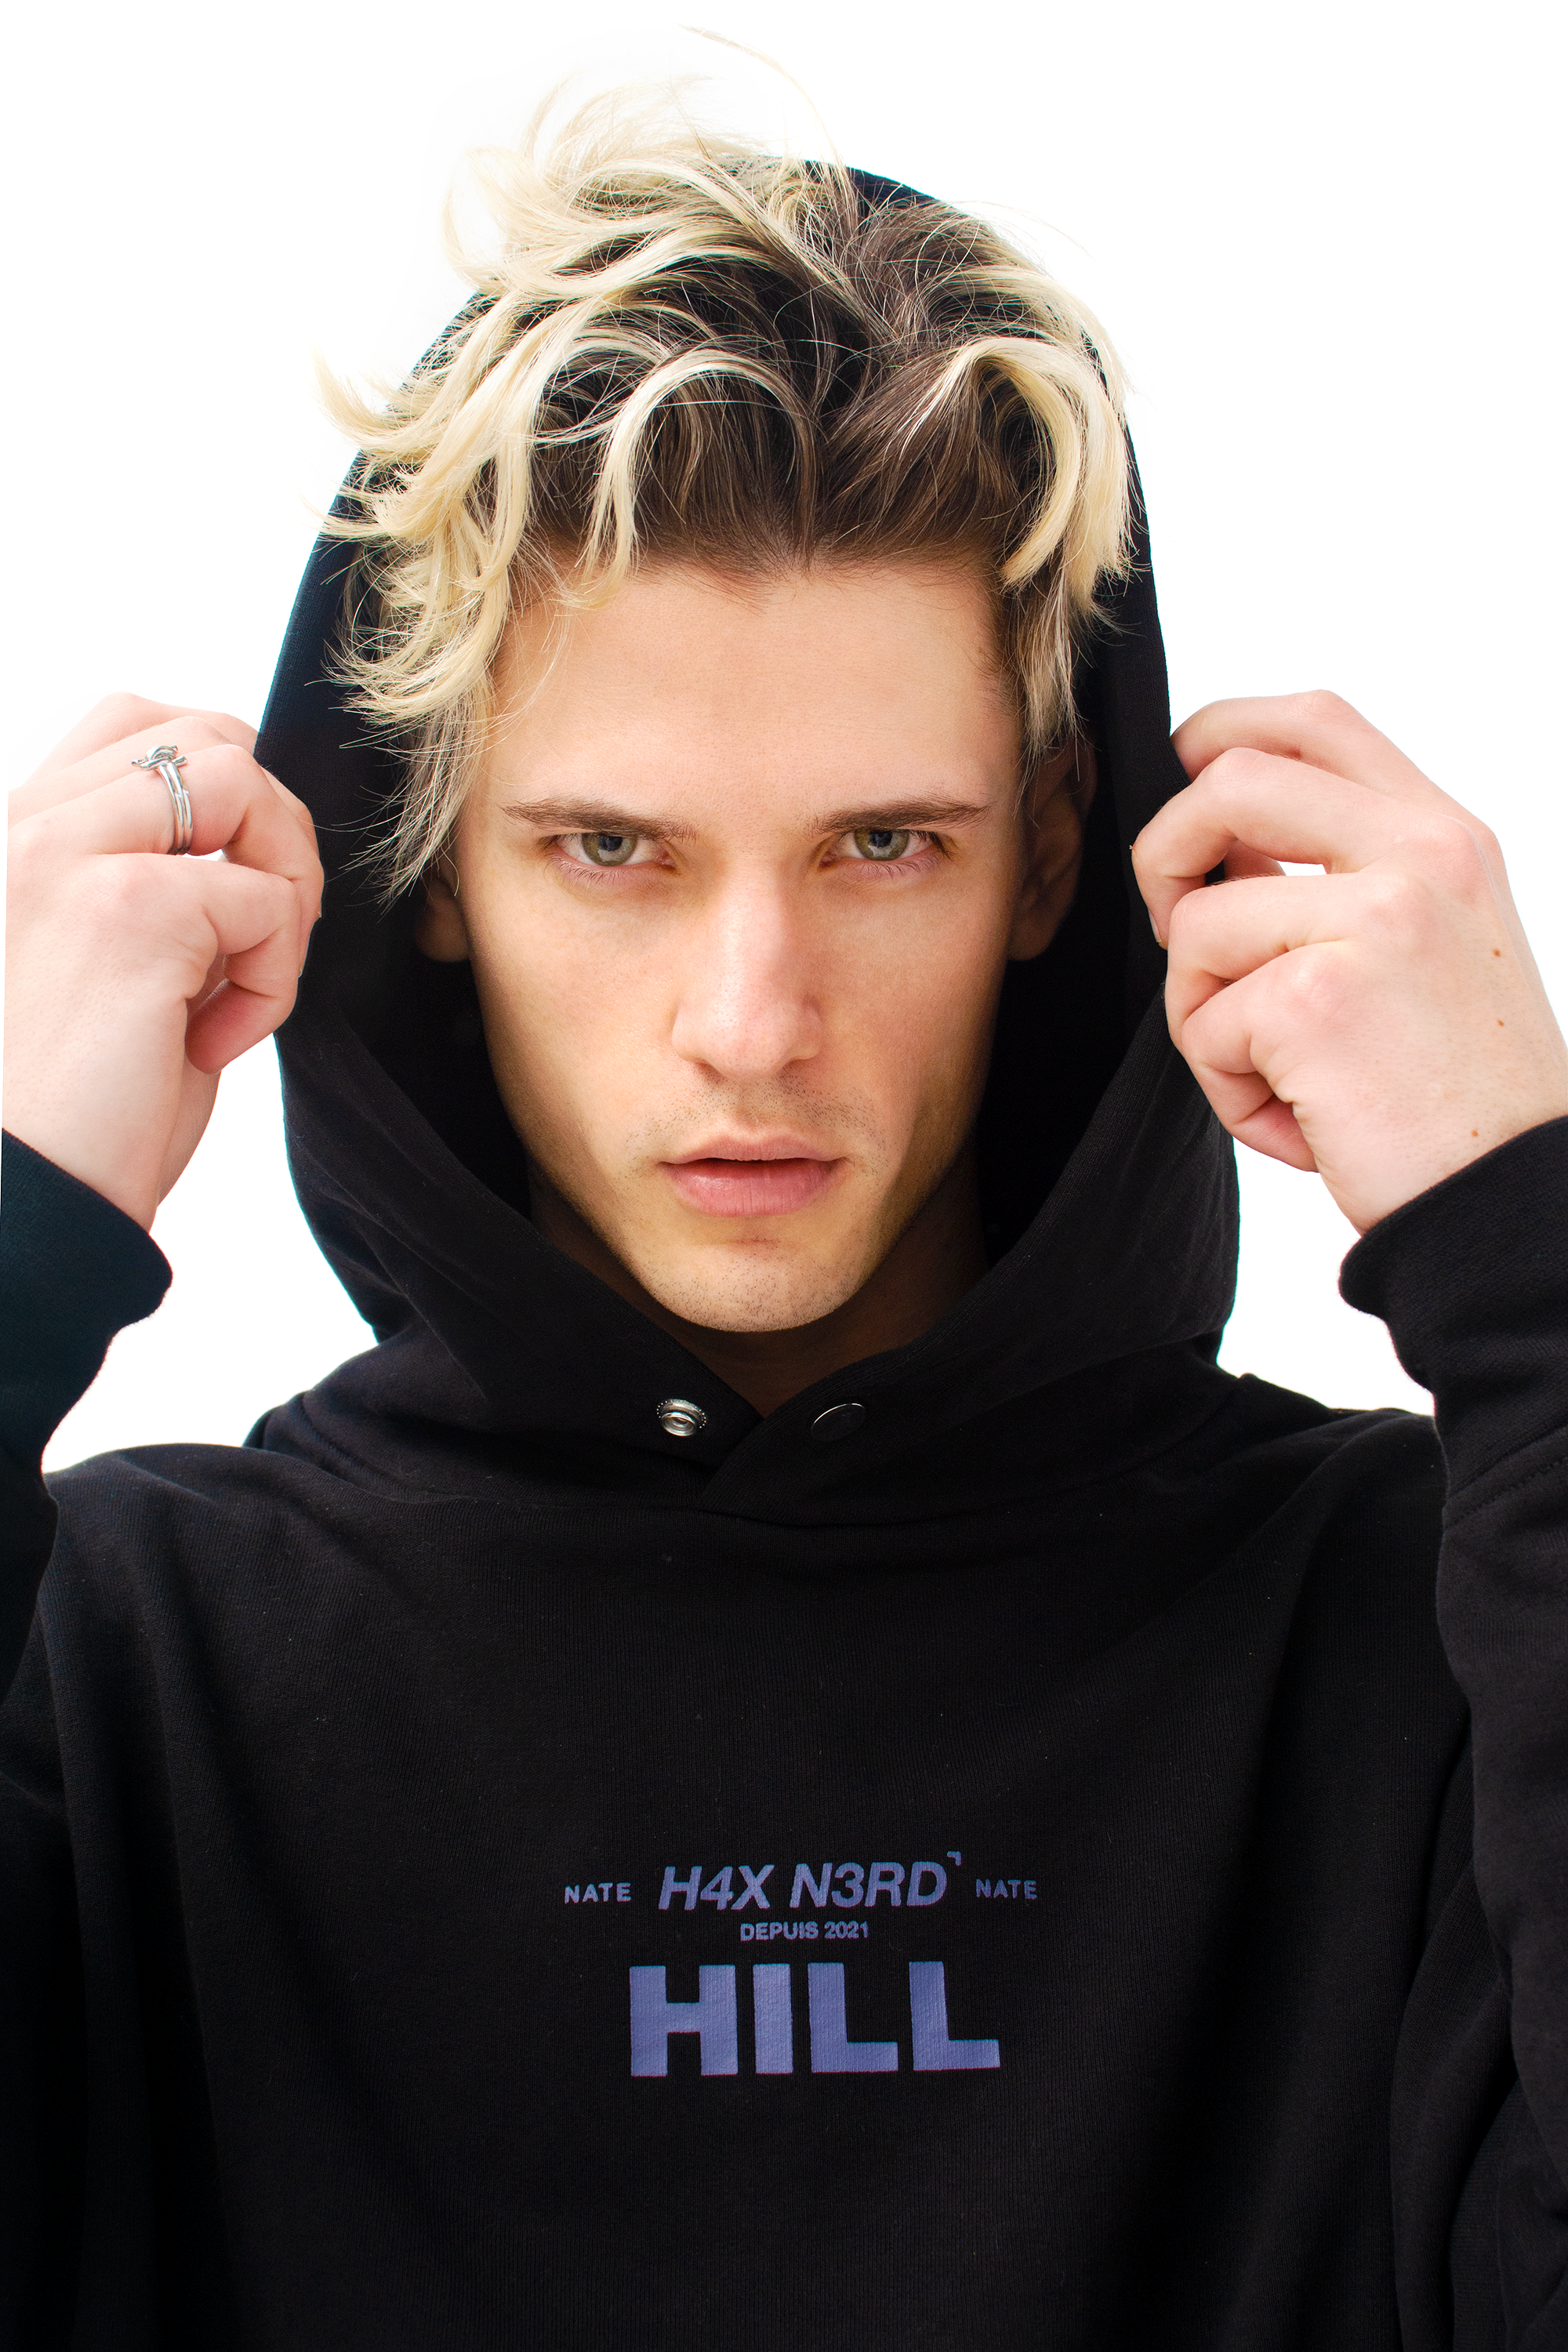 H4X & Nate Hill Reconnect for Second Collaborative Capsule